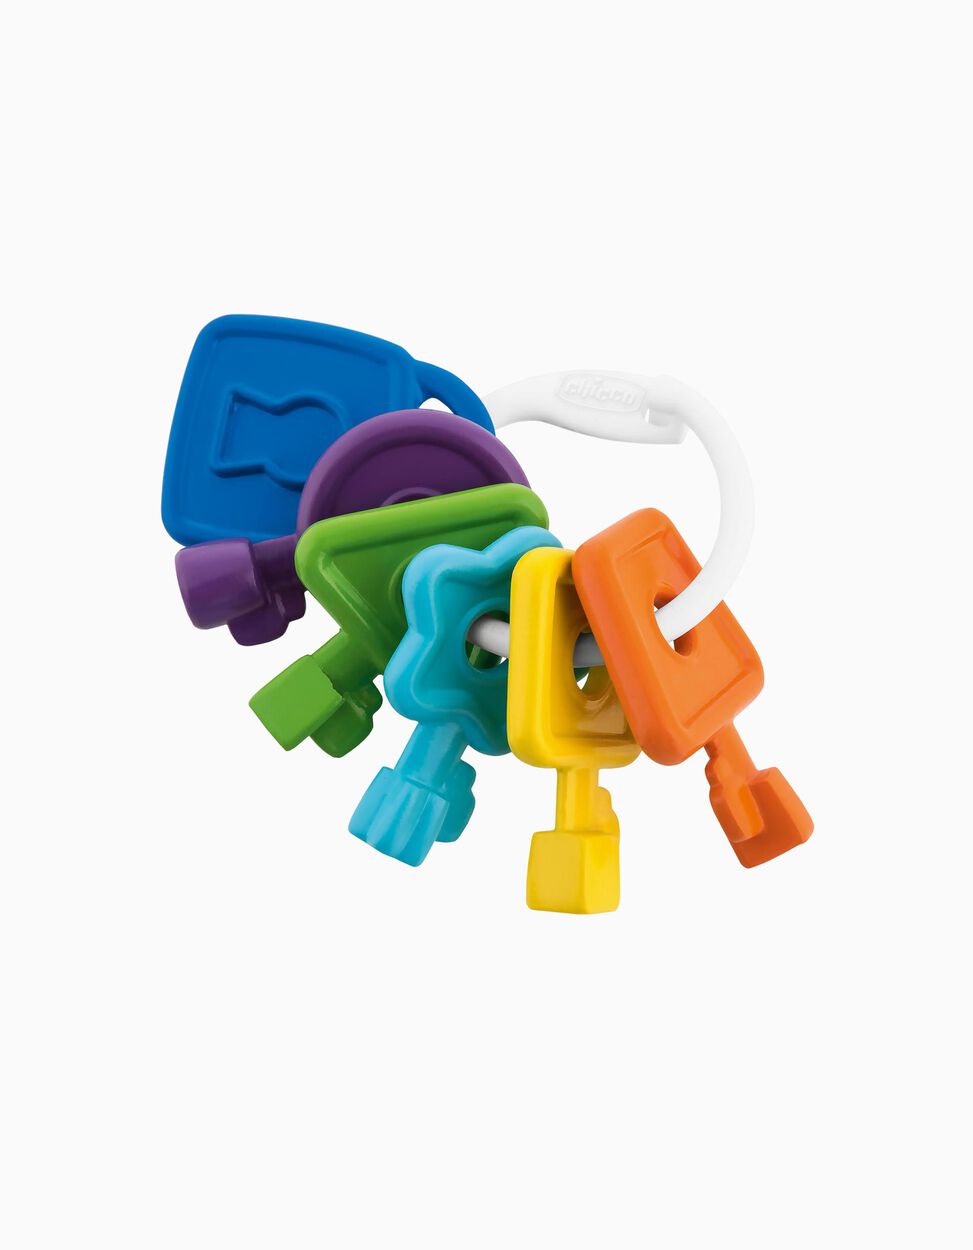 Maison des animaux Smart2Play Chicco